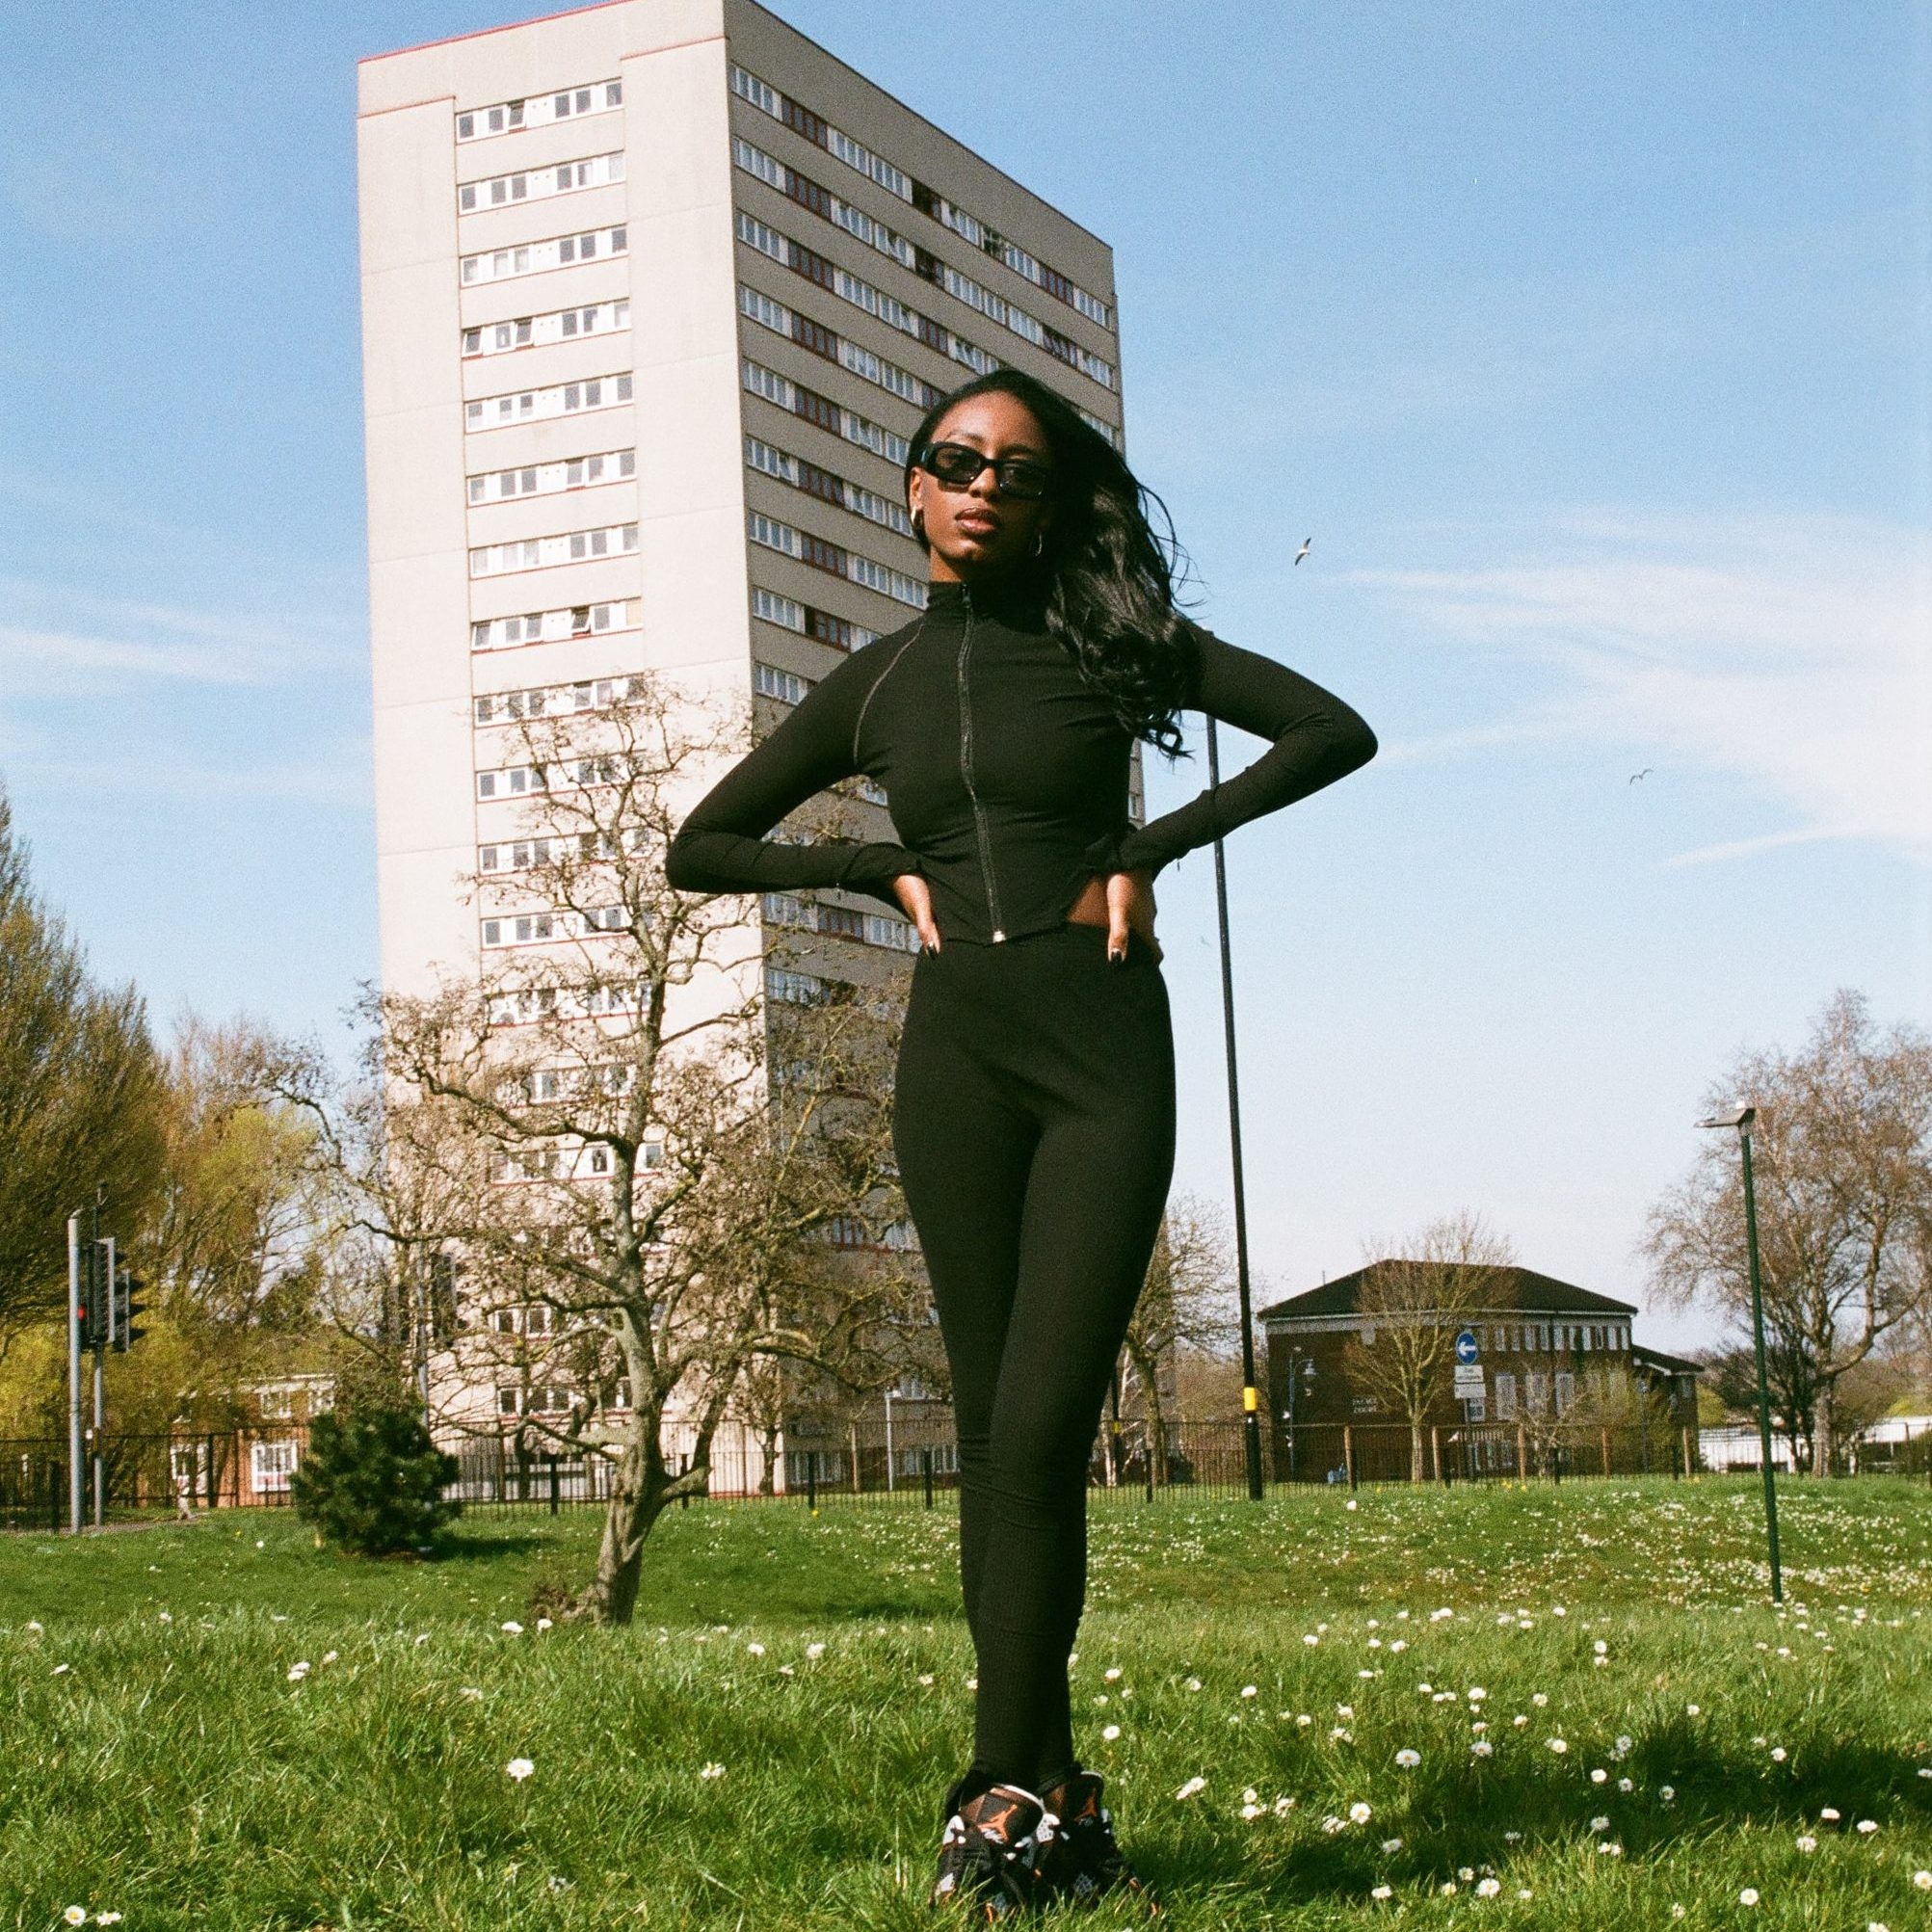 Jaydonclover in all black in front of a tower block.